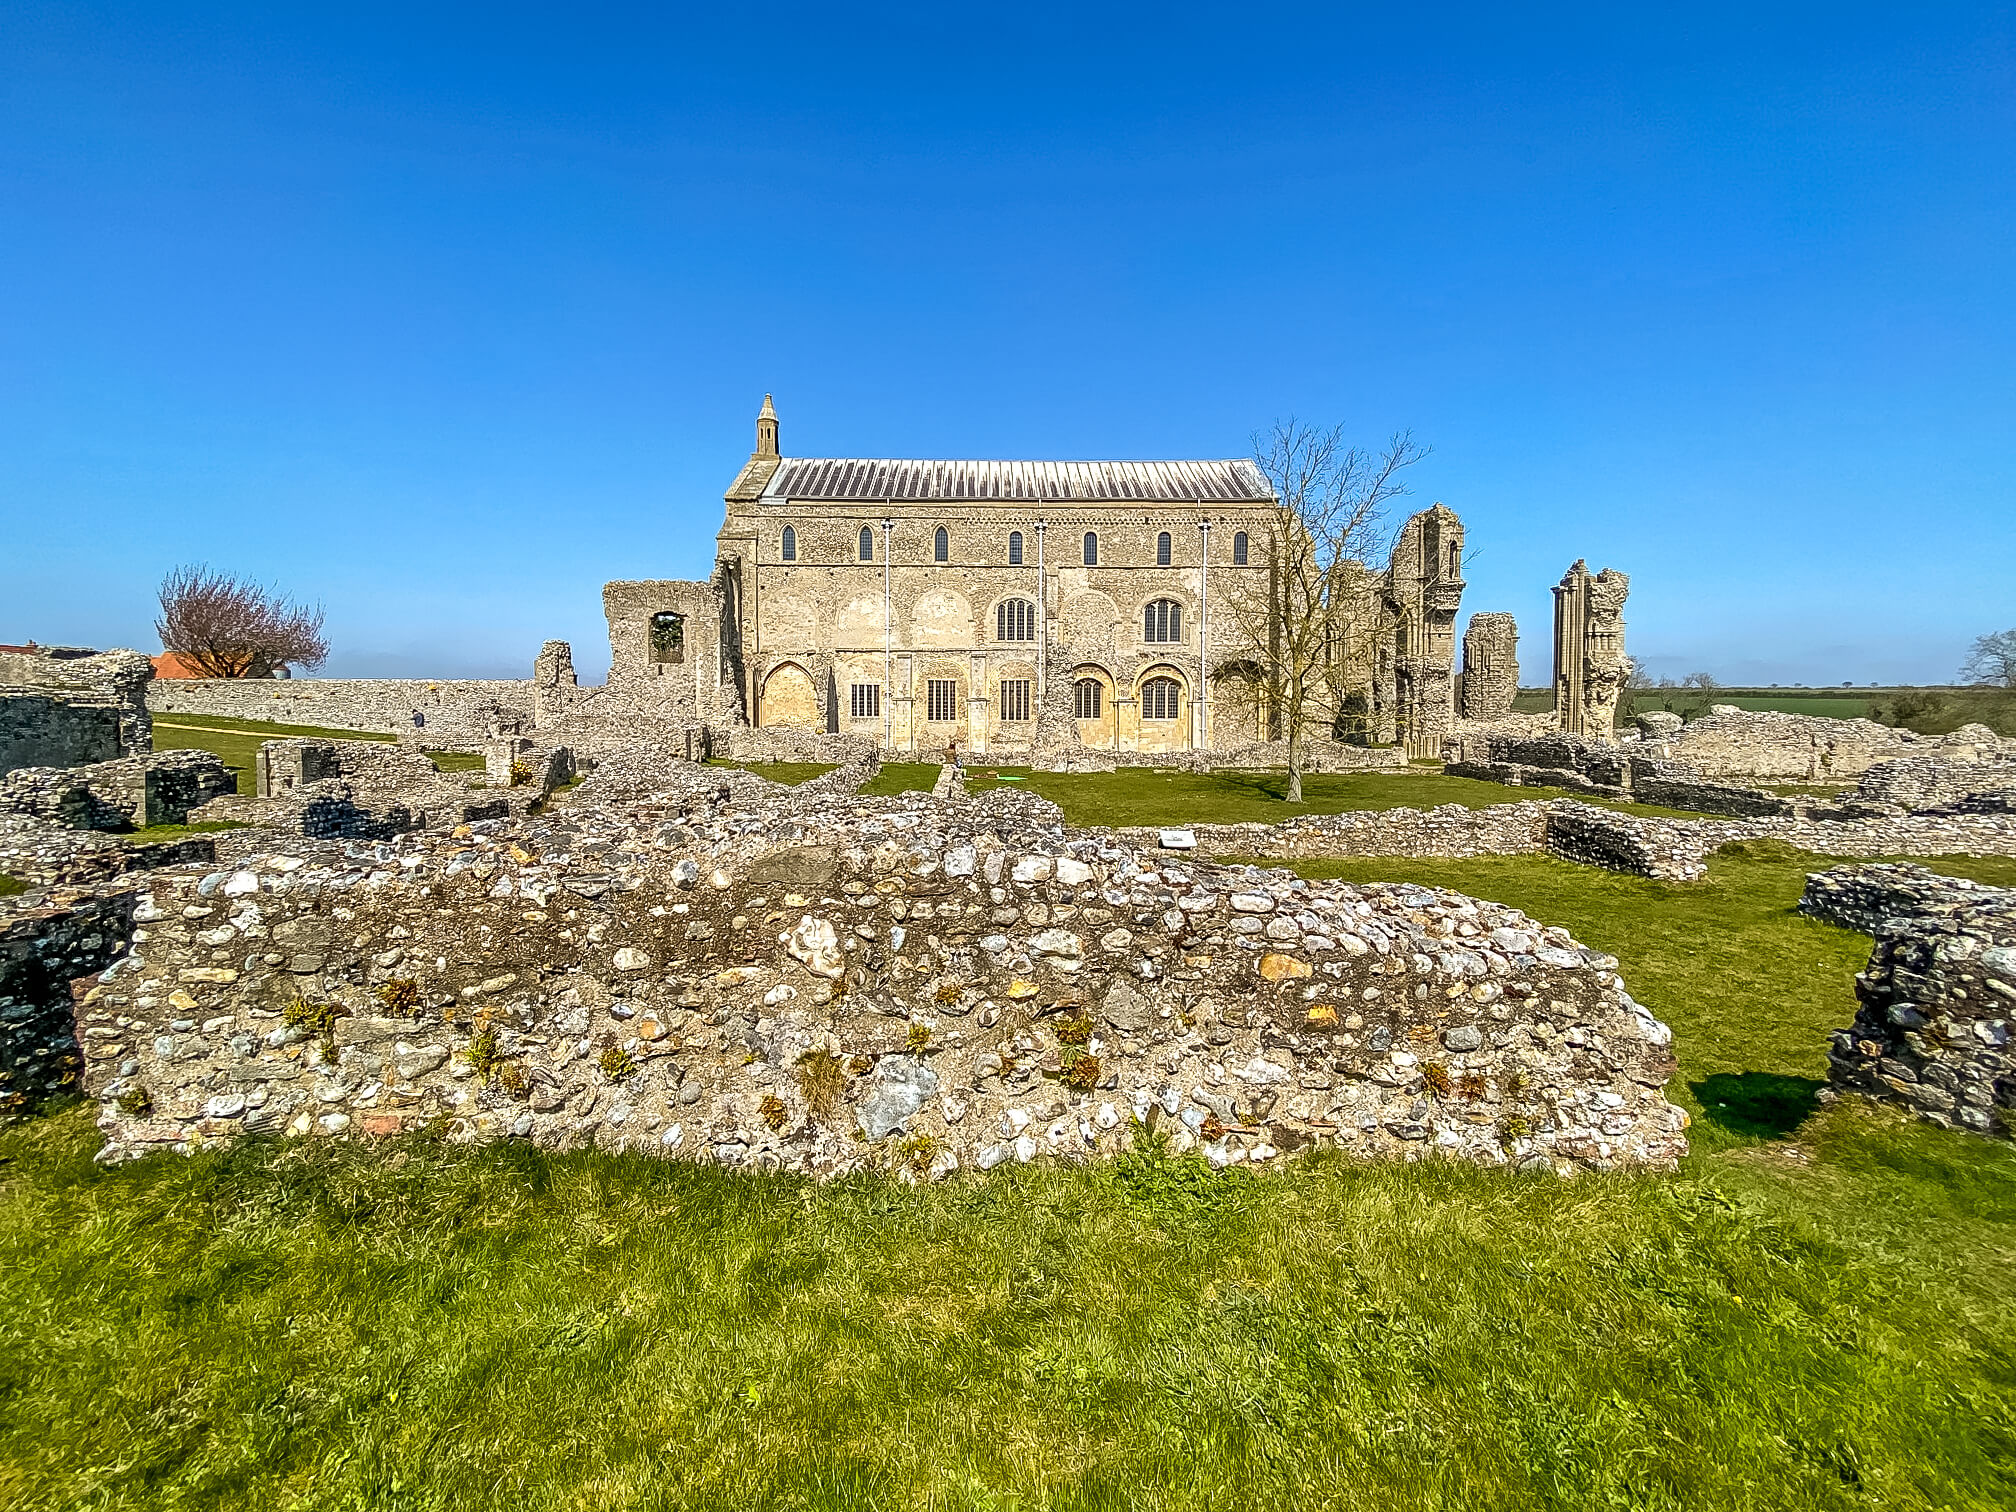 view of the Binham Priory church and ruins which are free to visit